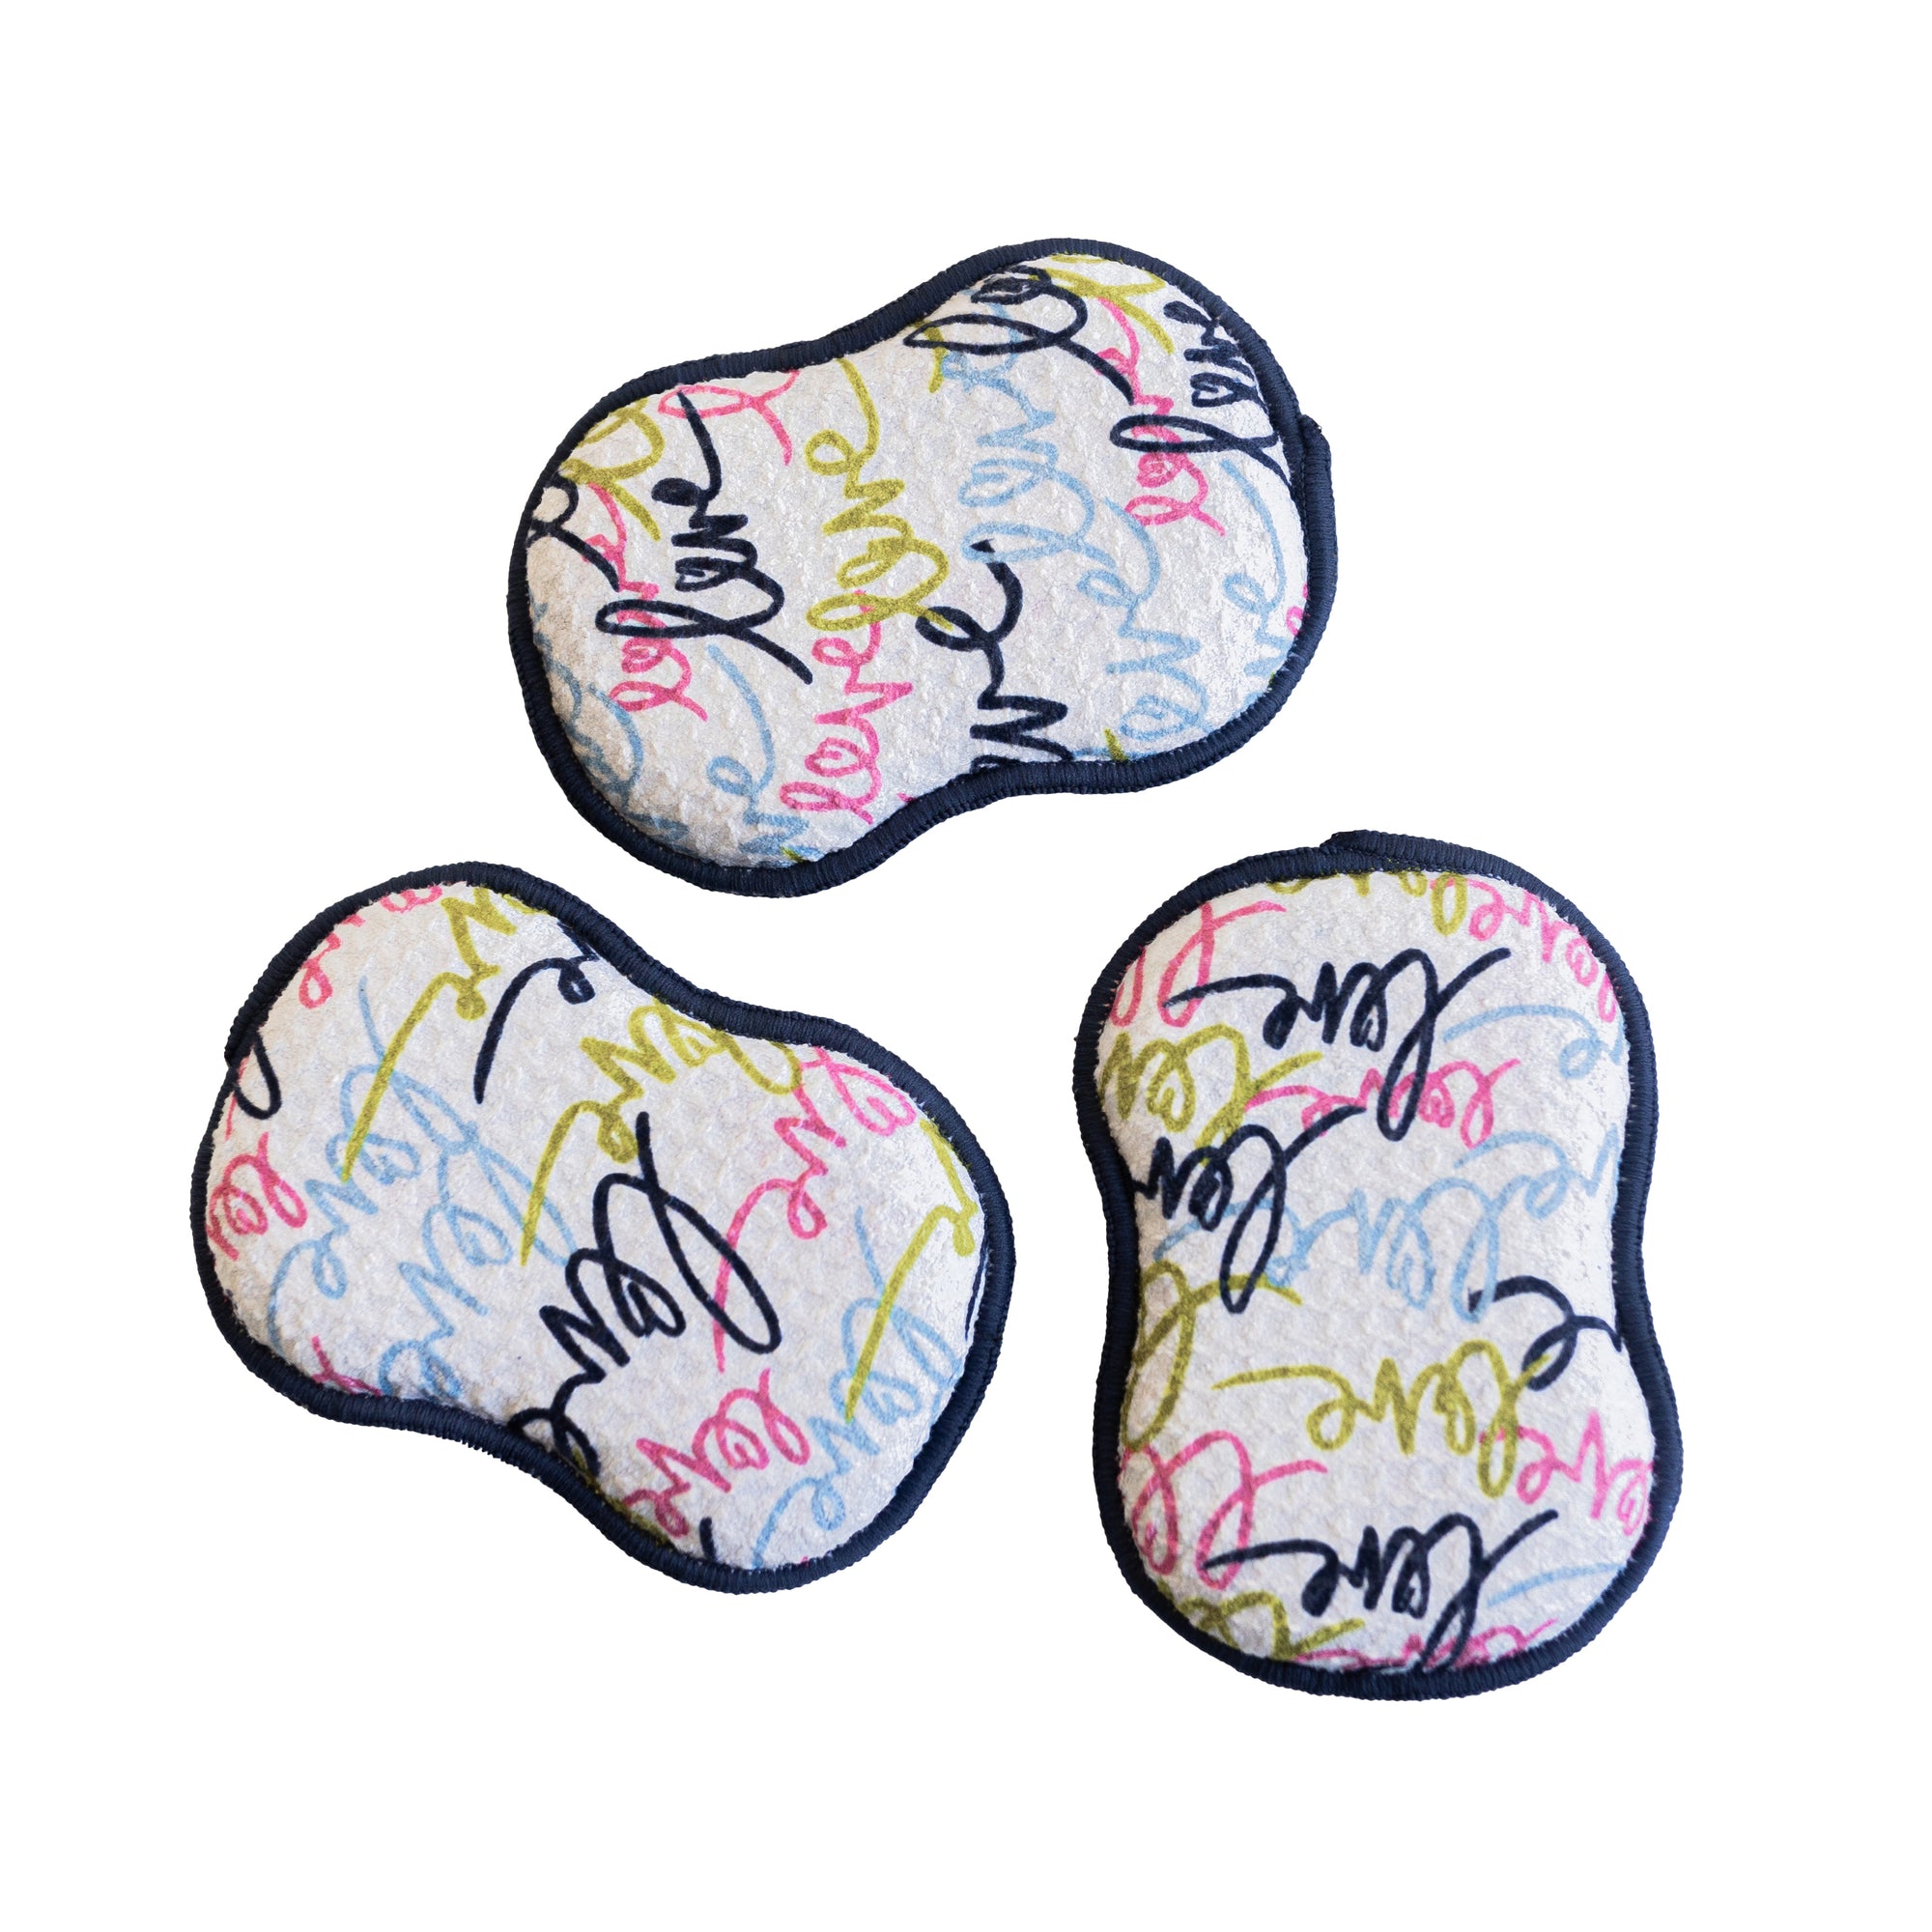 RE:usable Sponges (Set of 3) - HGC Love Sponges & Scouring Pads Once Again Home Co.   